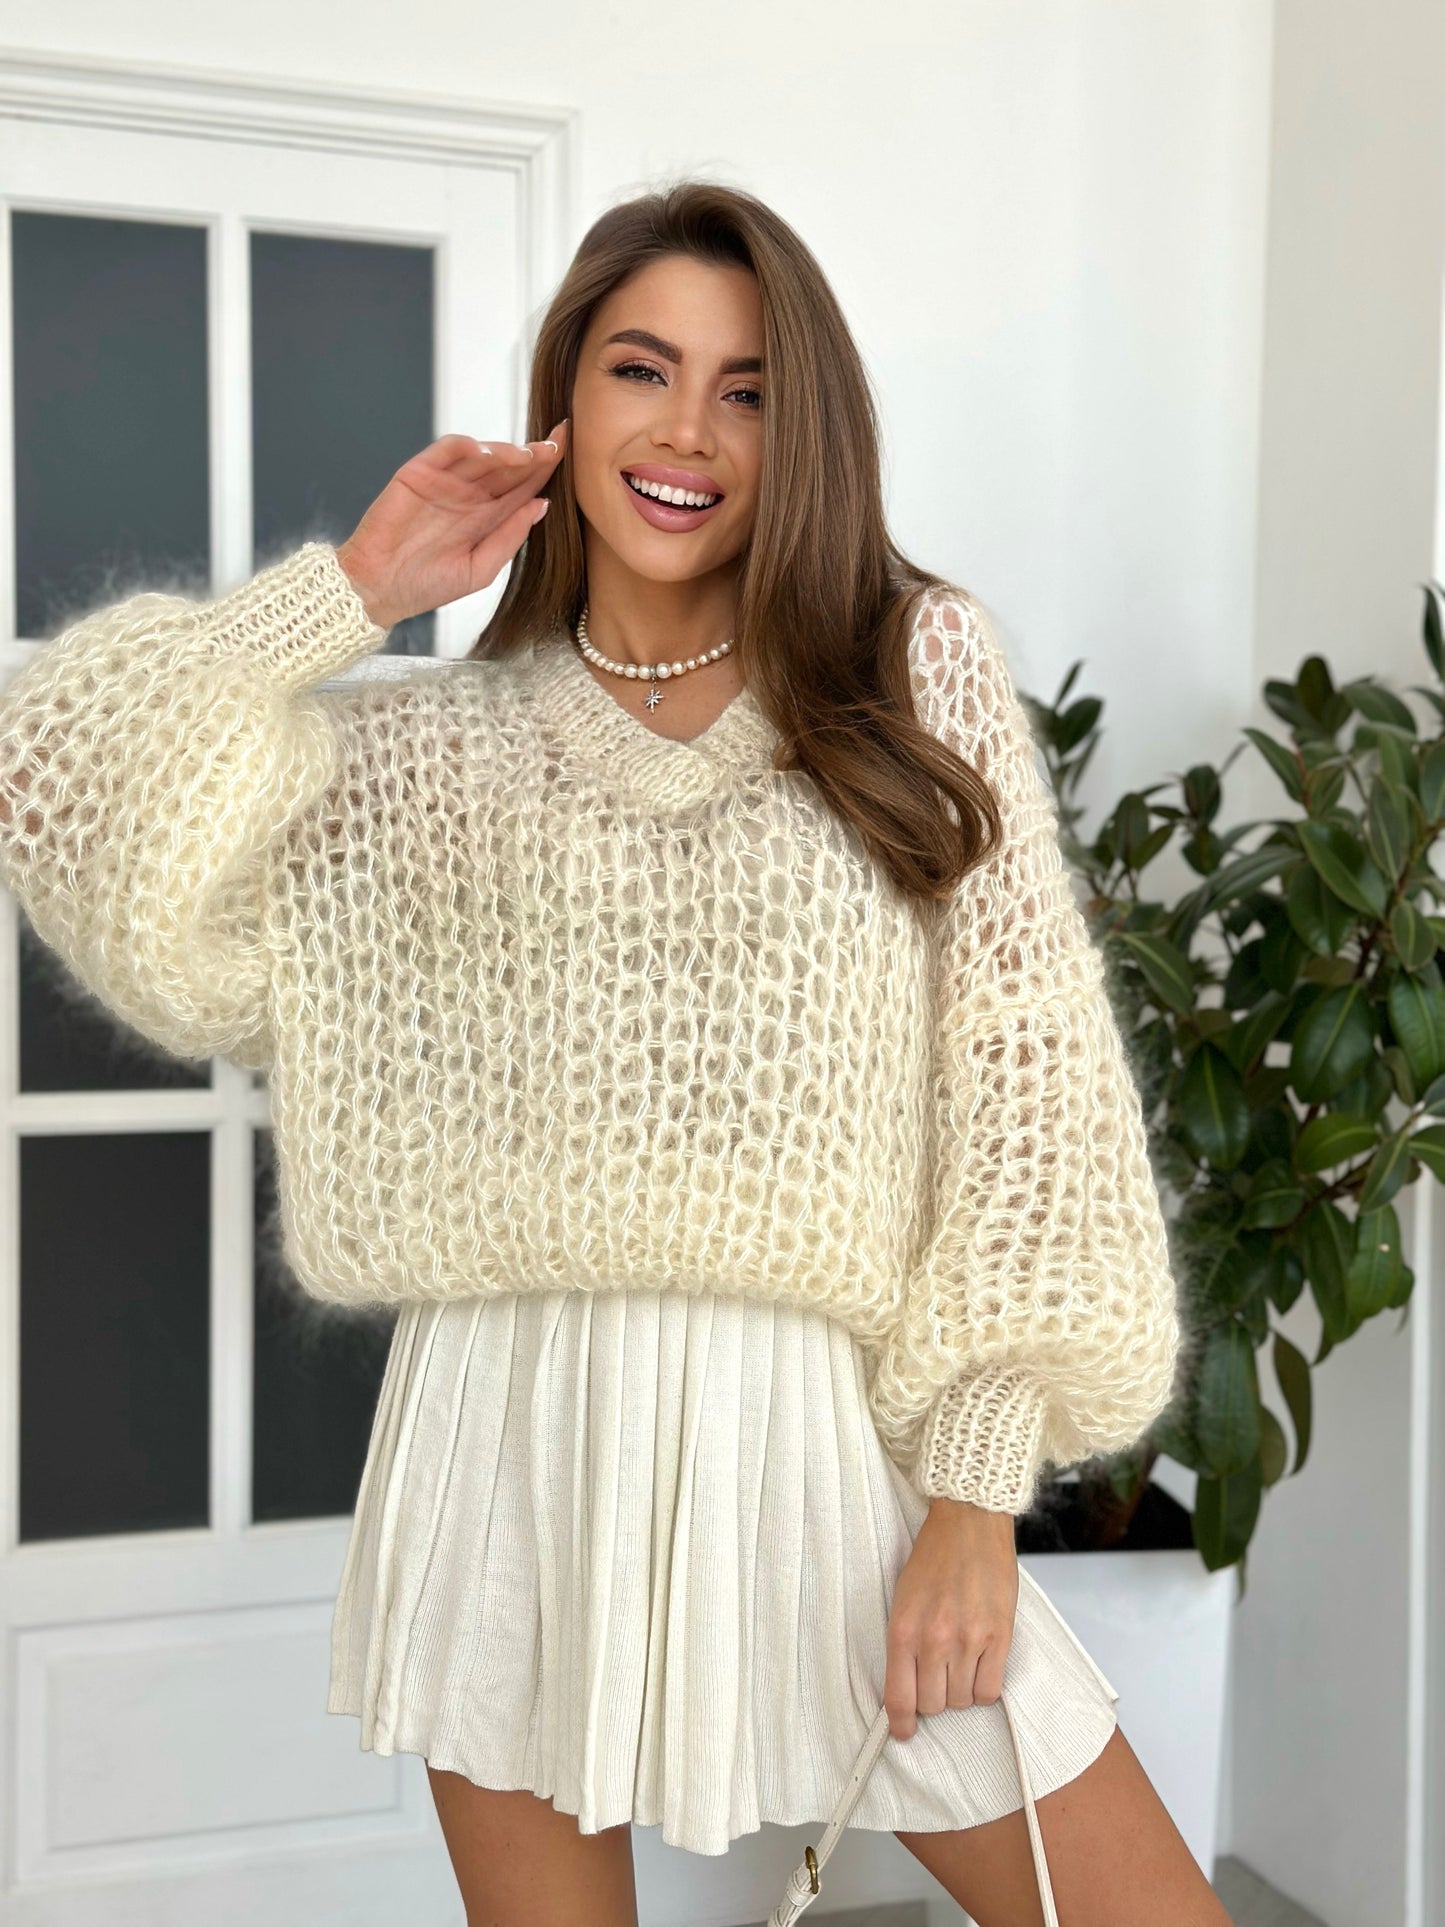 Oversized knitted sweater, Chunky Knit Sweater, Woman Hand Knit sweater, Winter Pullover Sweater, Warm Loose handmade Sweater